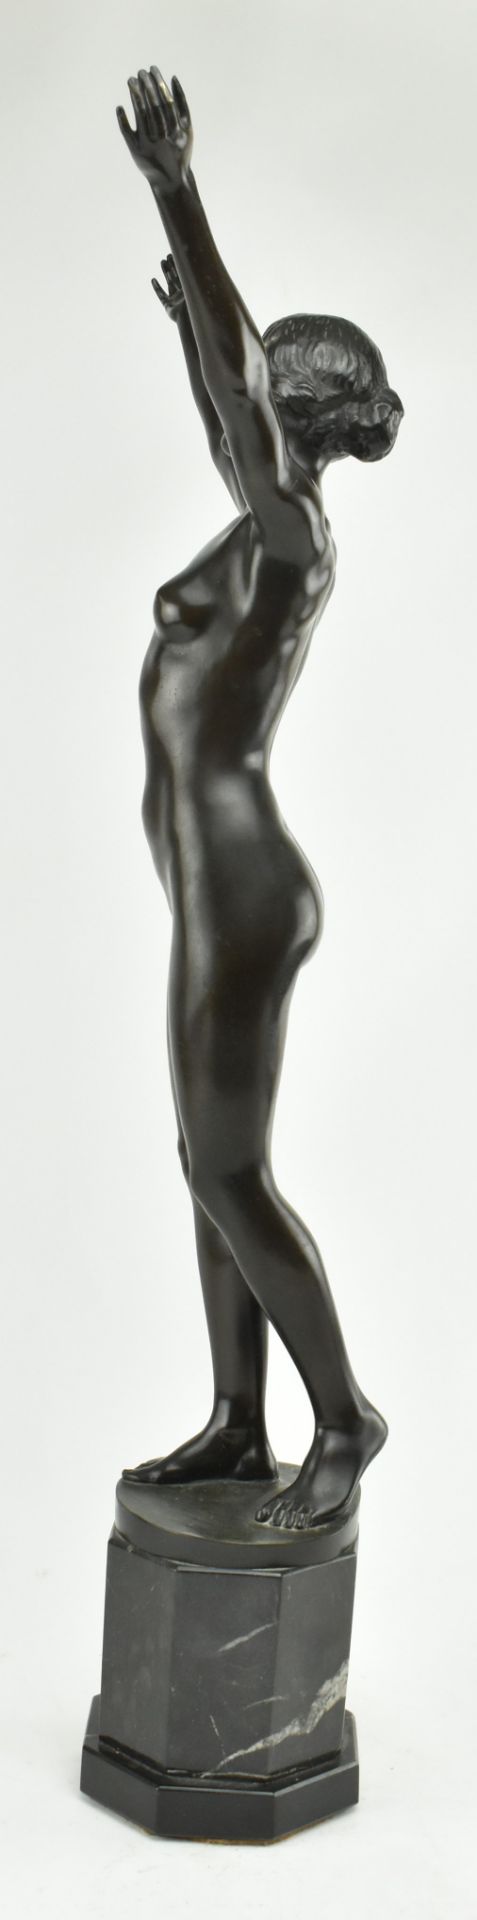 AFTER PAUL AICHELE (1859-1920) - BRONZE SCULPTURE OF LADY - Image 3 of 7